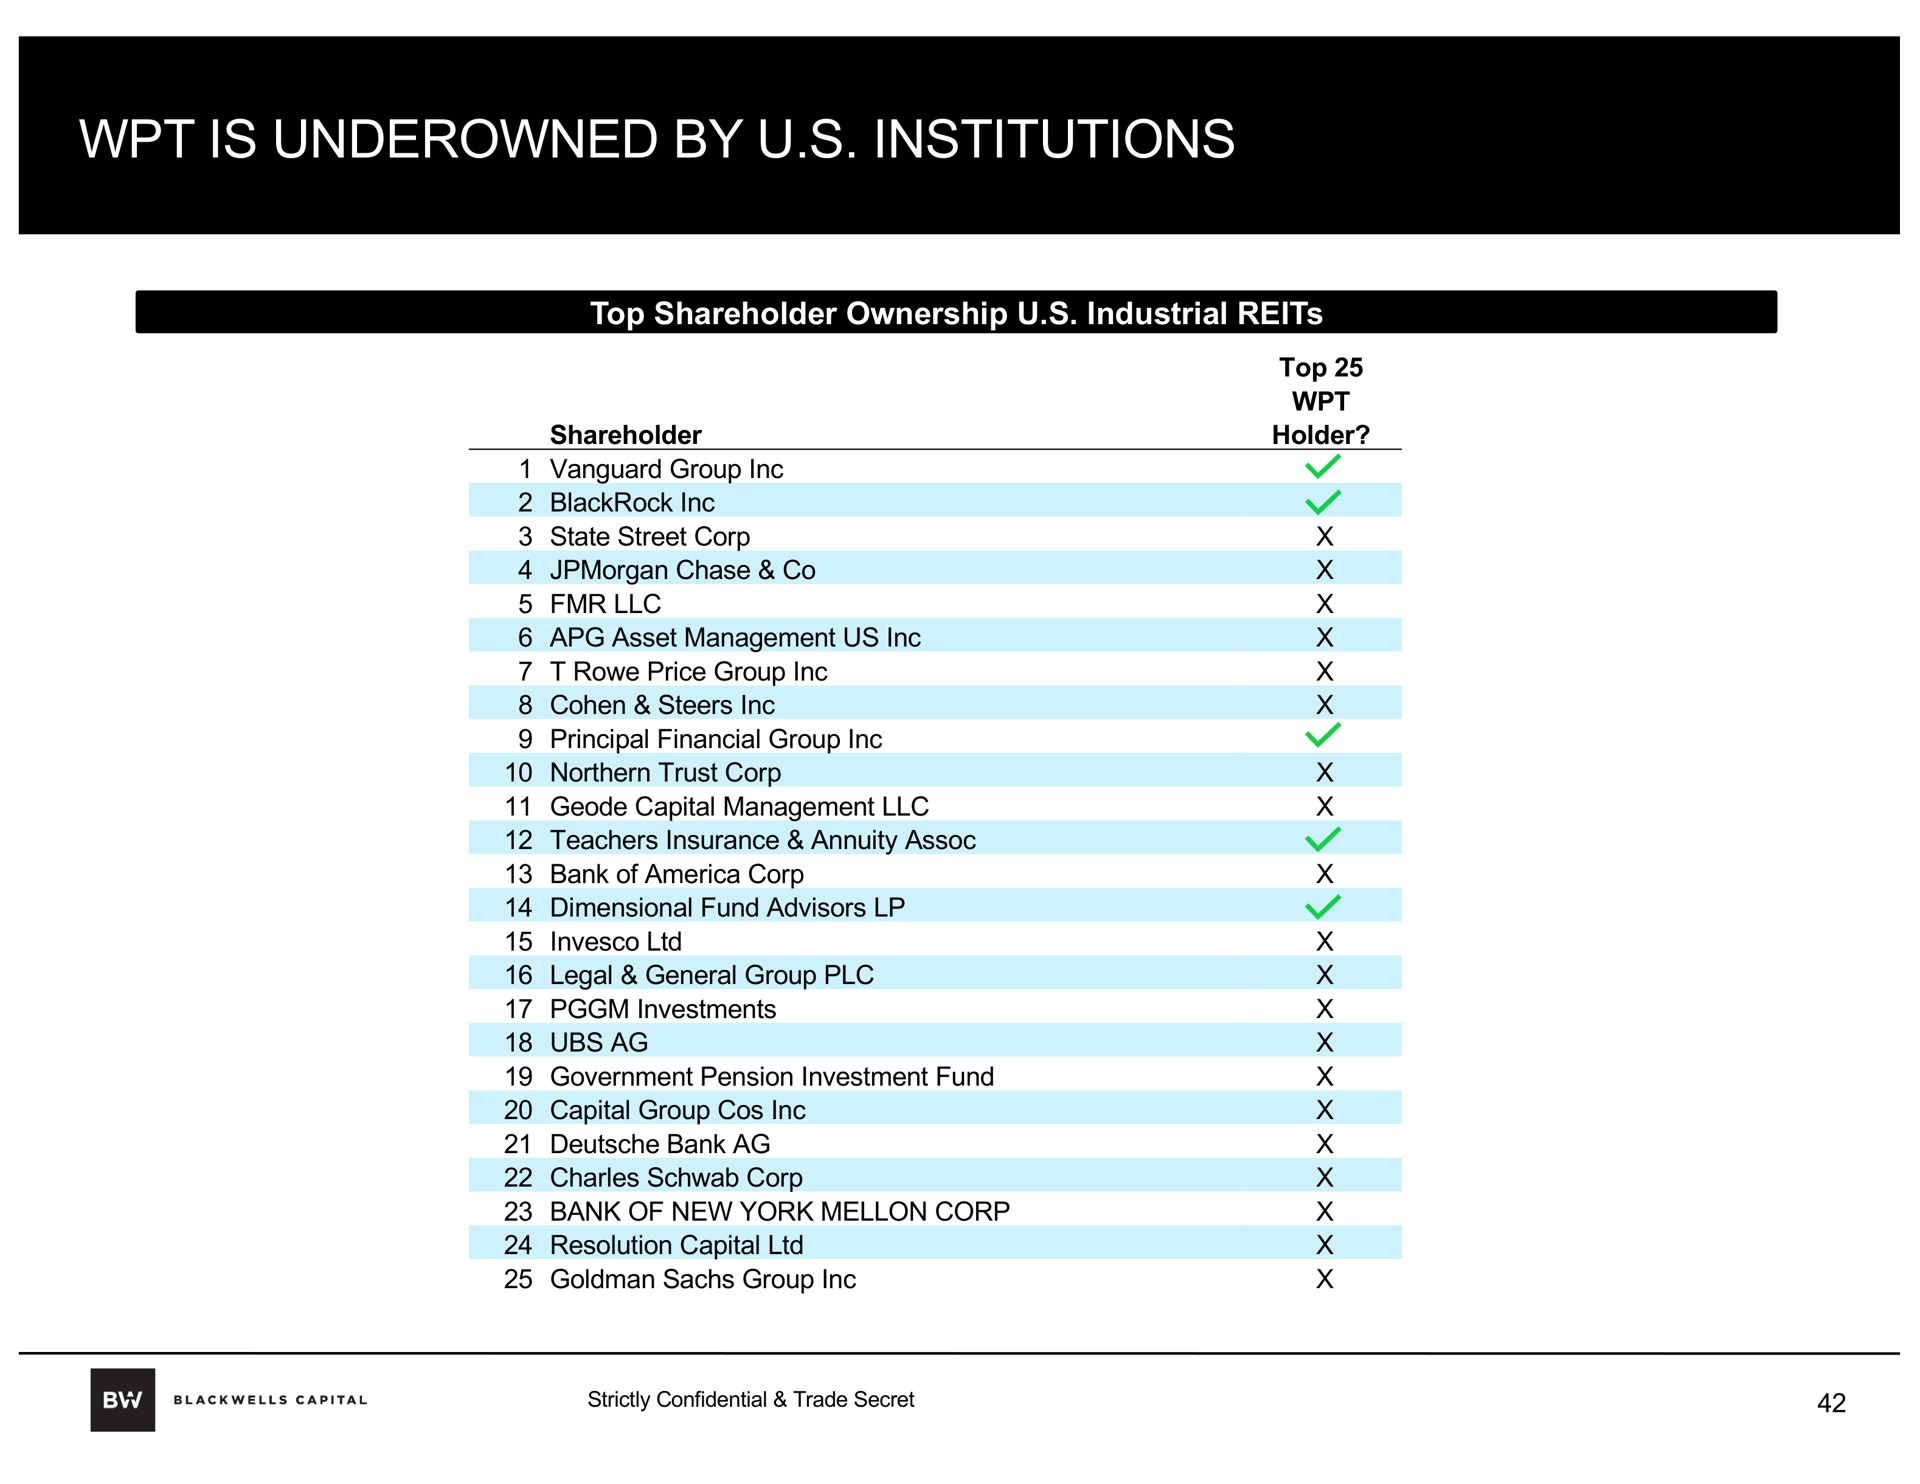 is by institutions | Blackwells Capital